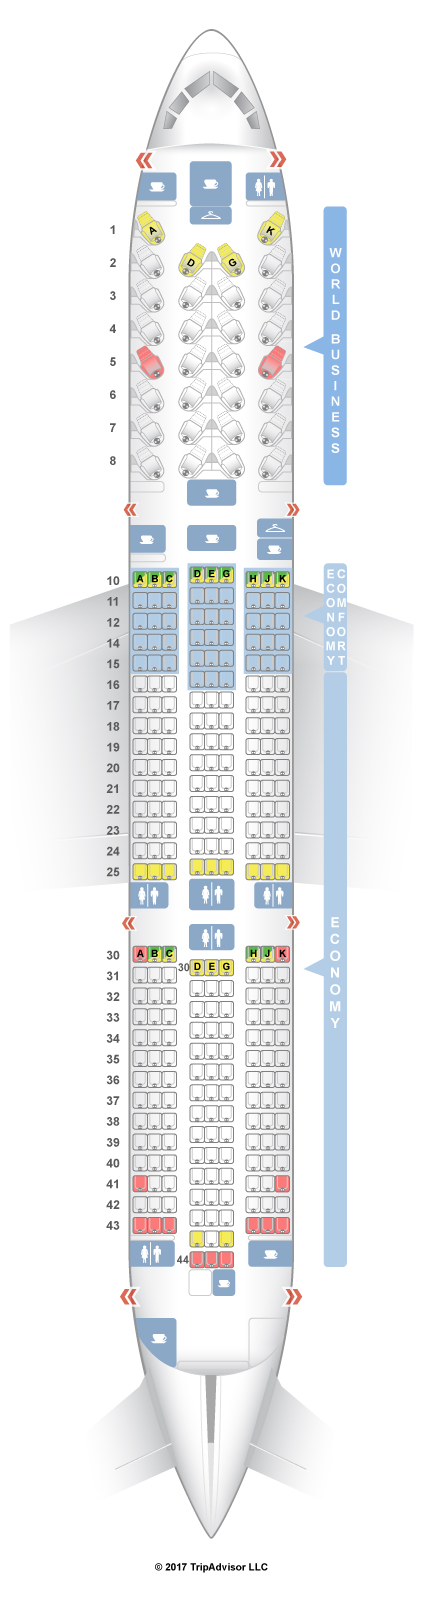 Klm Seat Map My Xxx Hot Girl